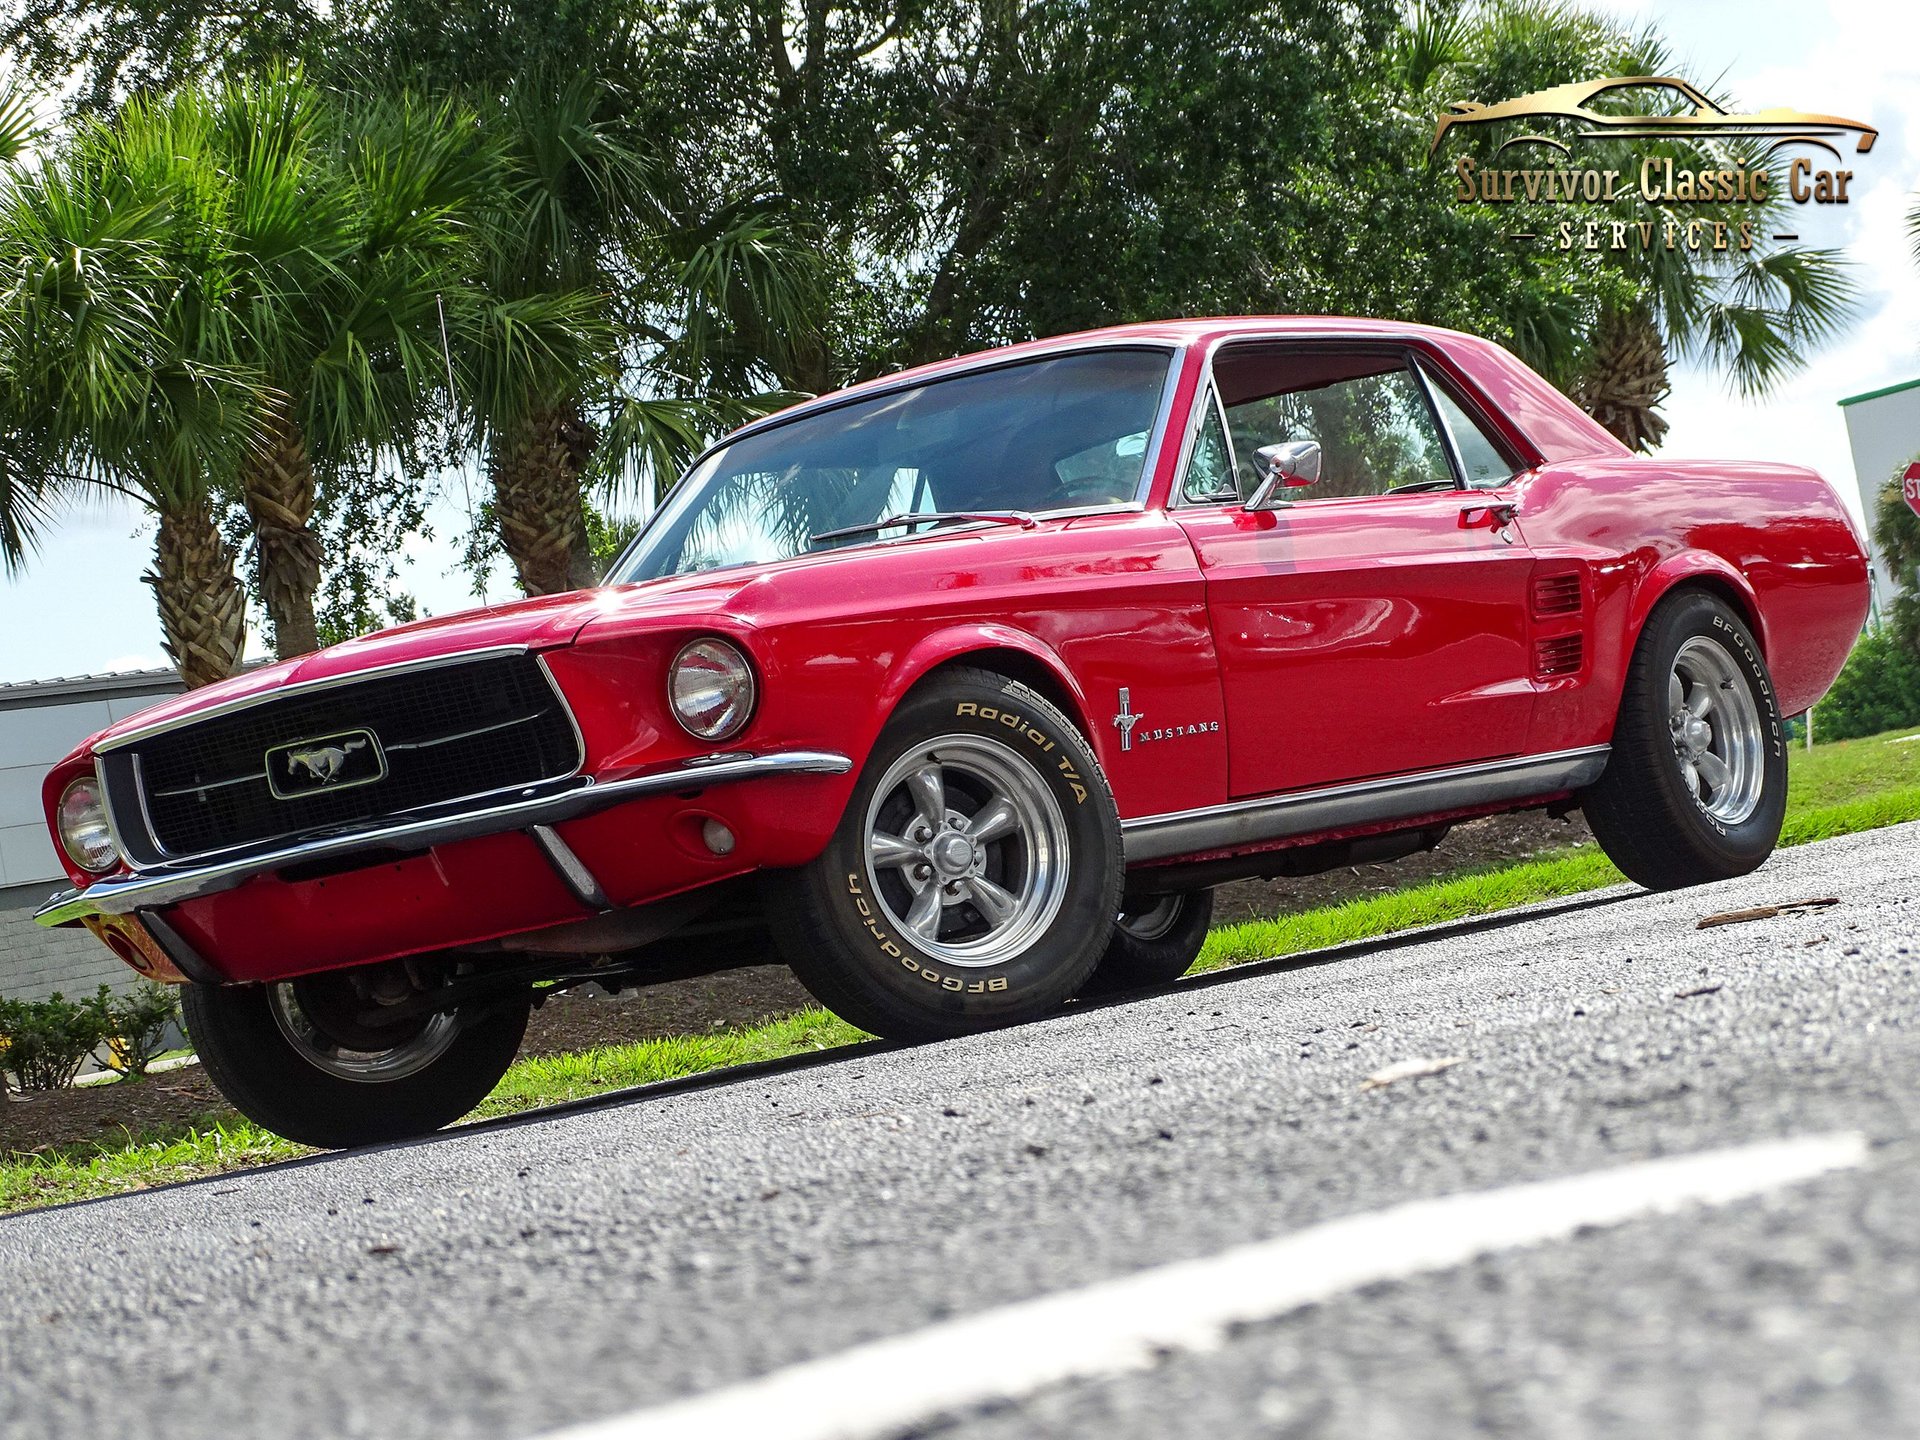 1967 Ford Mustang | Survivor Classic Cars Services